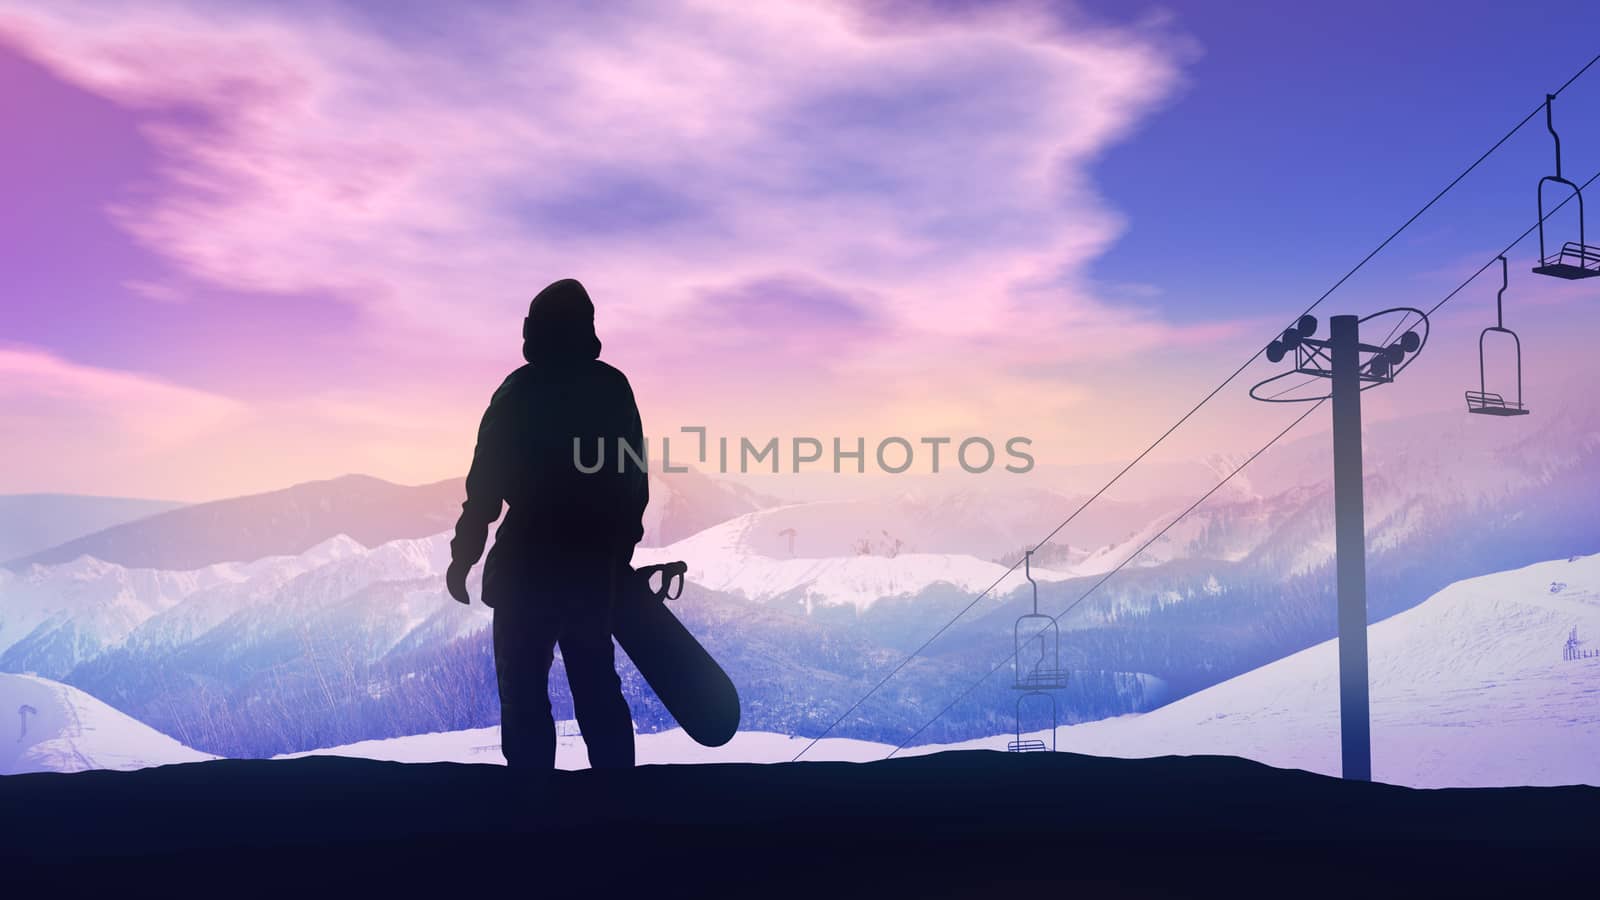 Dark silhouette of a snowboarder against the backdrop the snowy mountains.